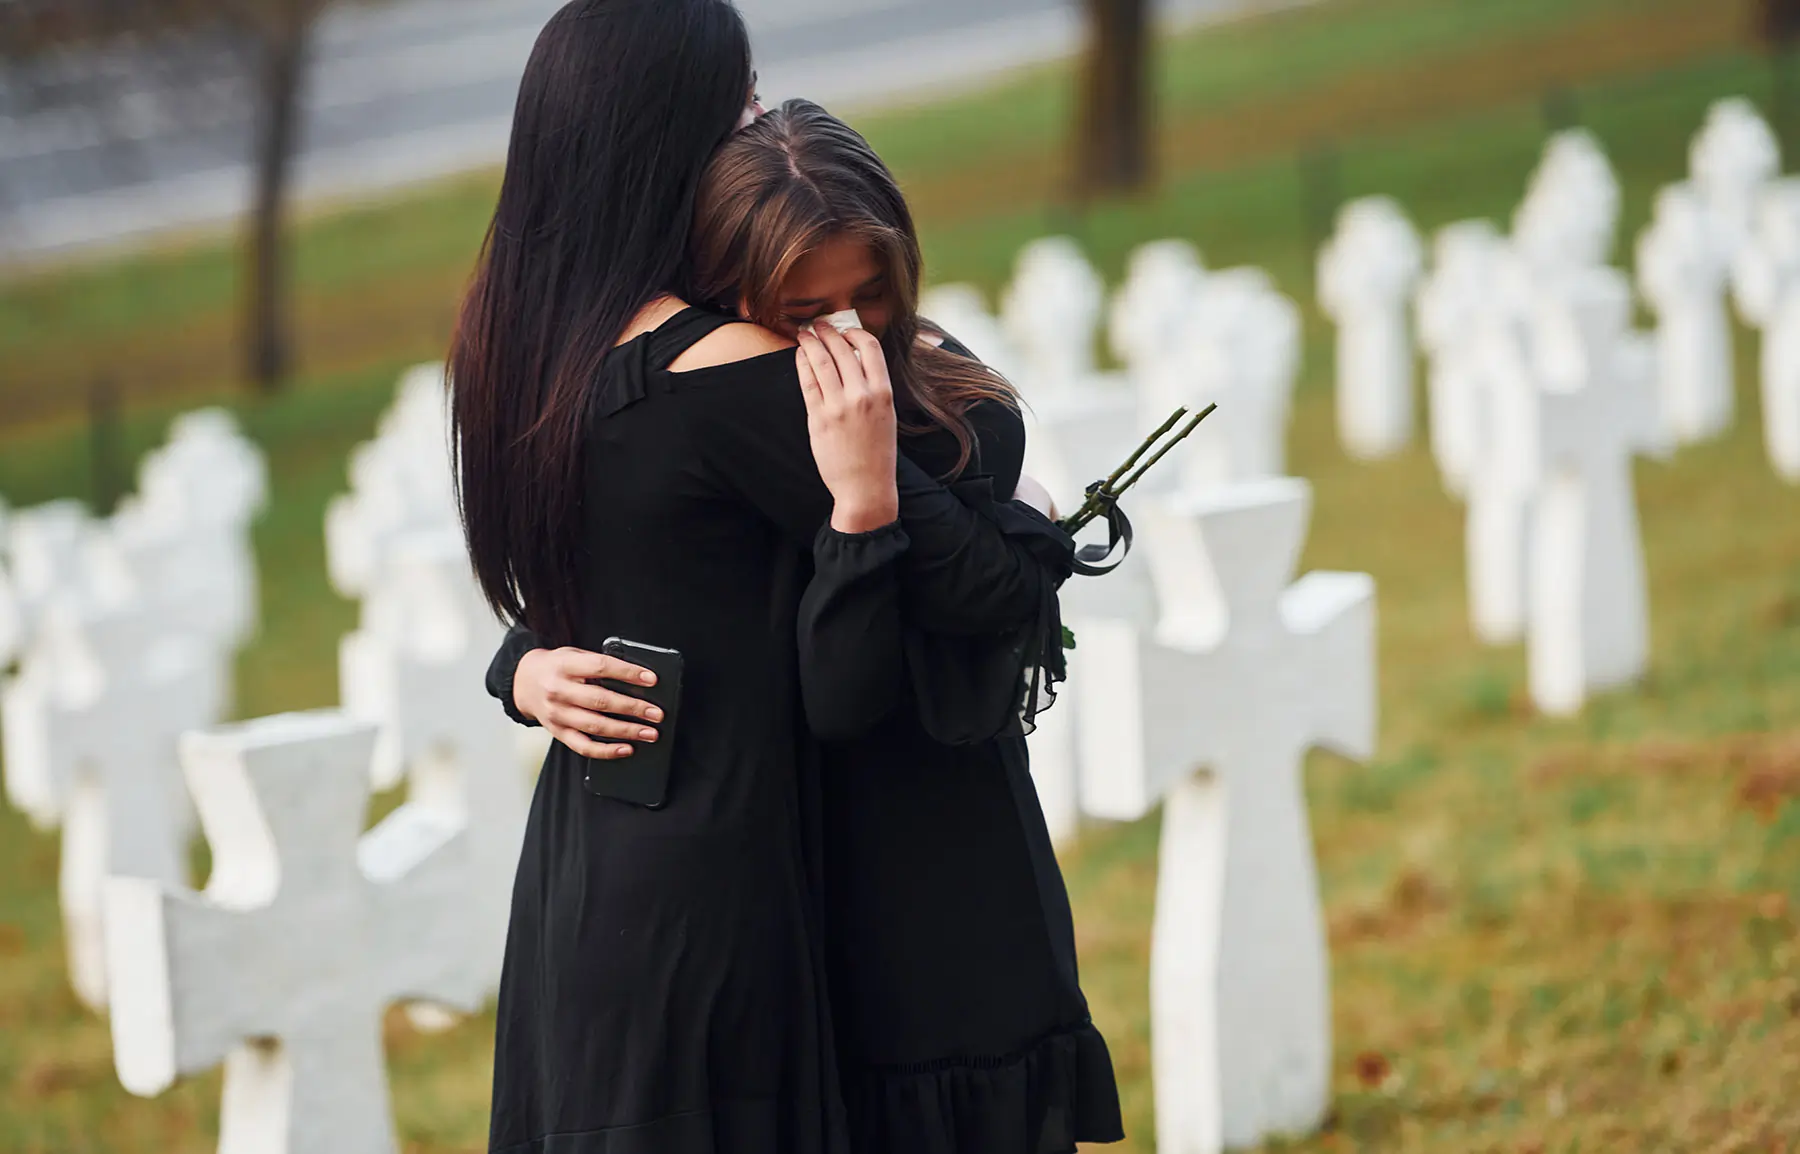 Embracing each other and crying. Two young women in black clothes visiting cemetery with many white crosses. Conception of funeral and death.